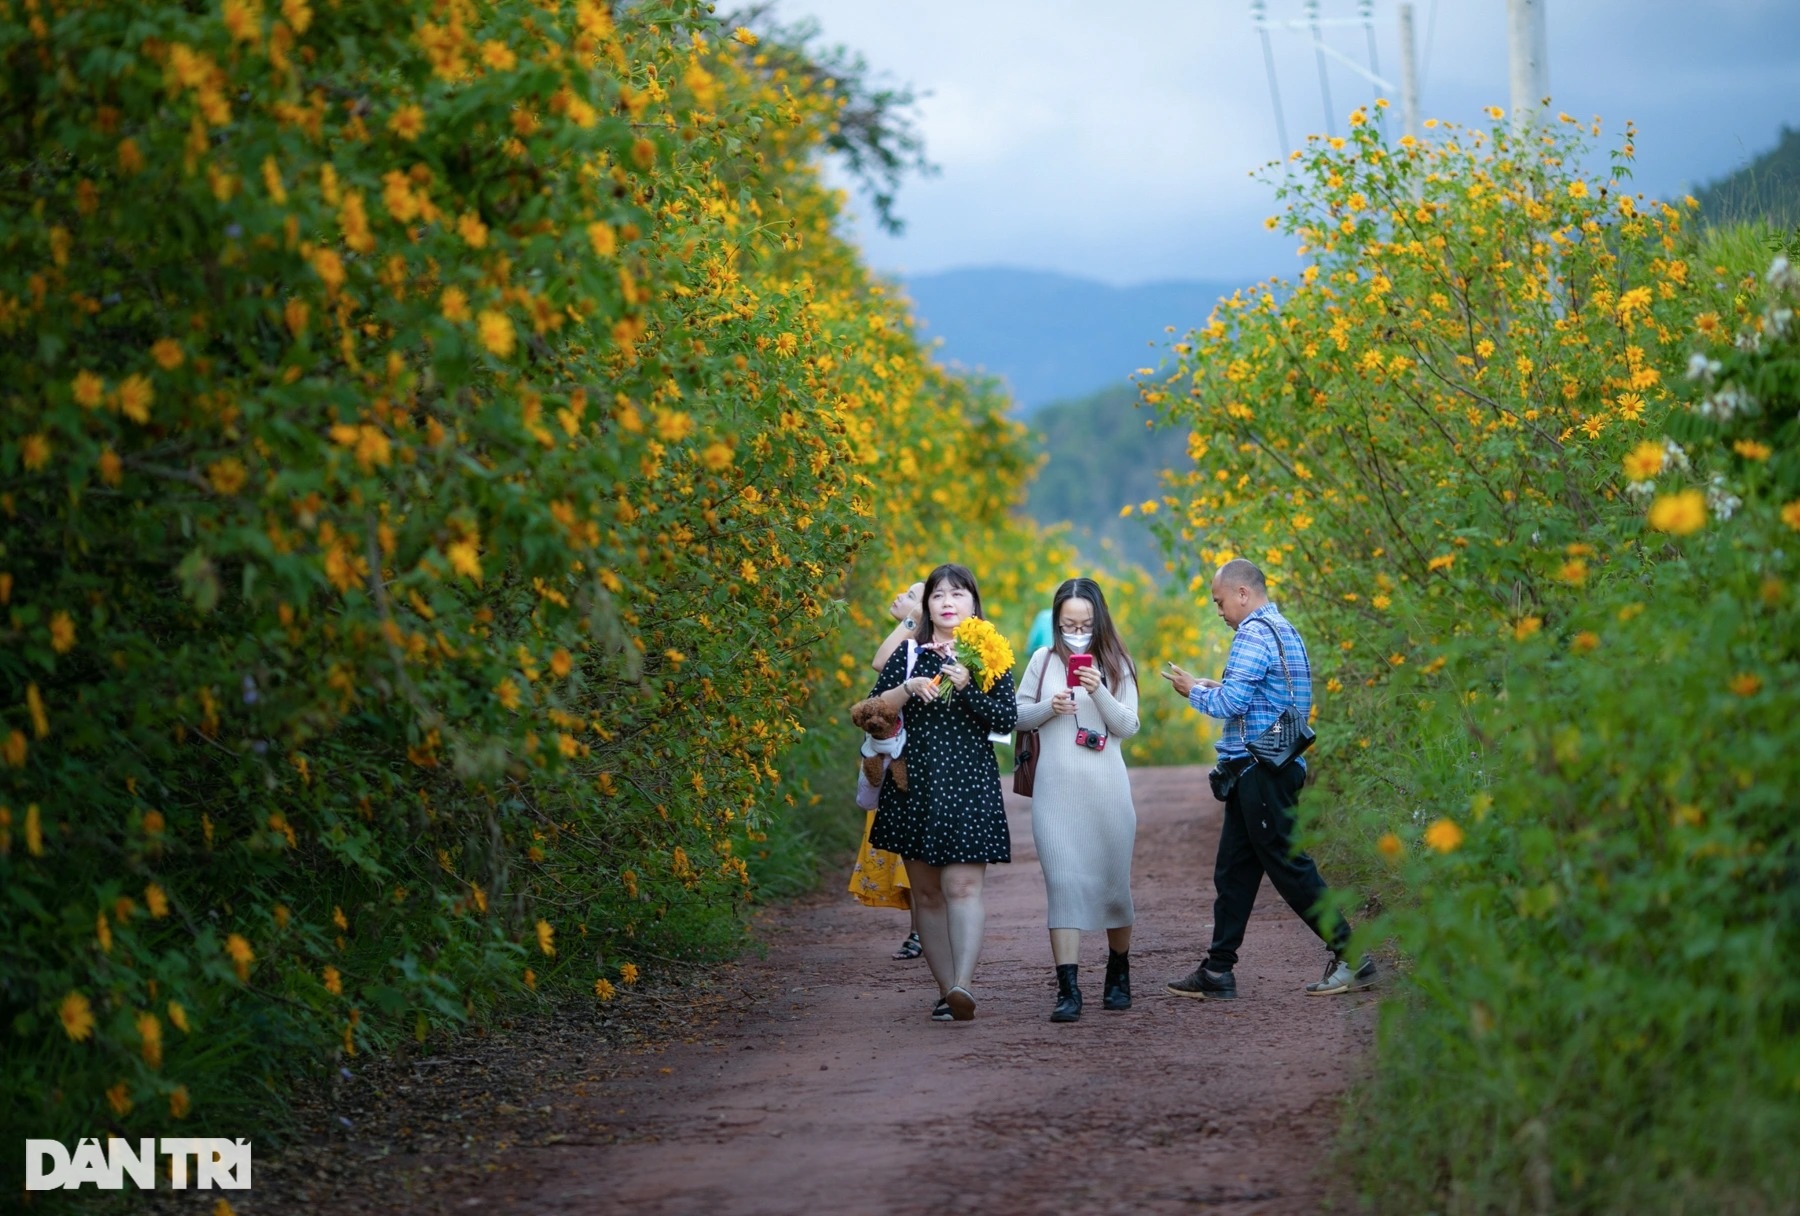 Wild sunflowers bloom on the hillside, young people flock to the outskirts of Da Lat to check-in - 2